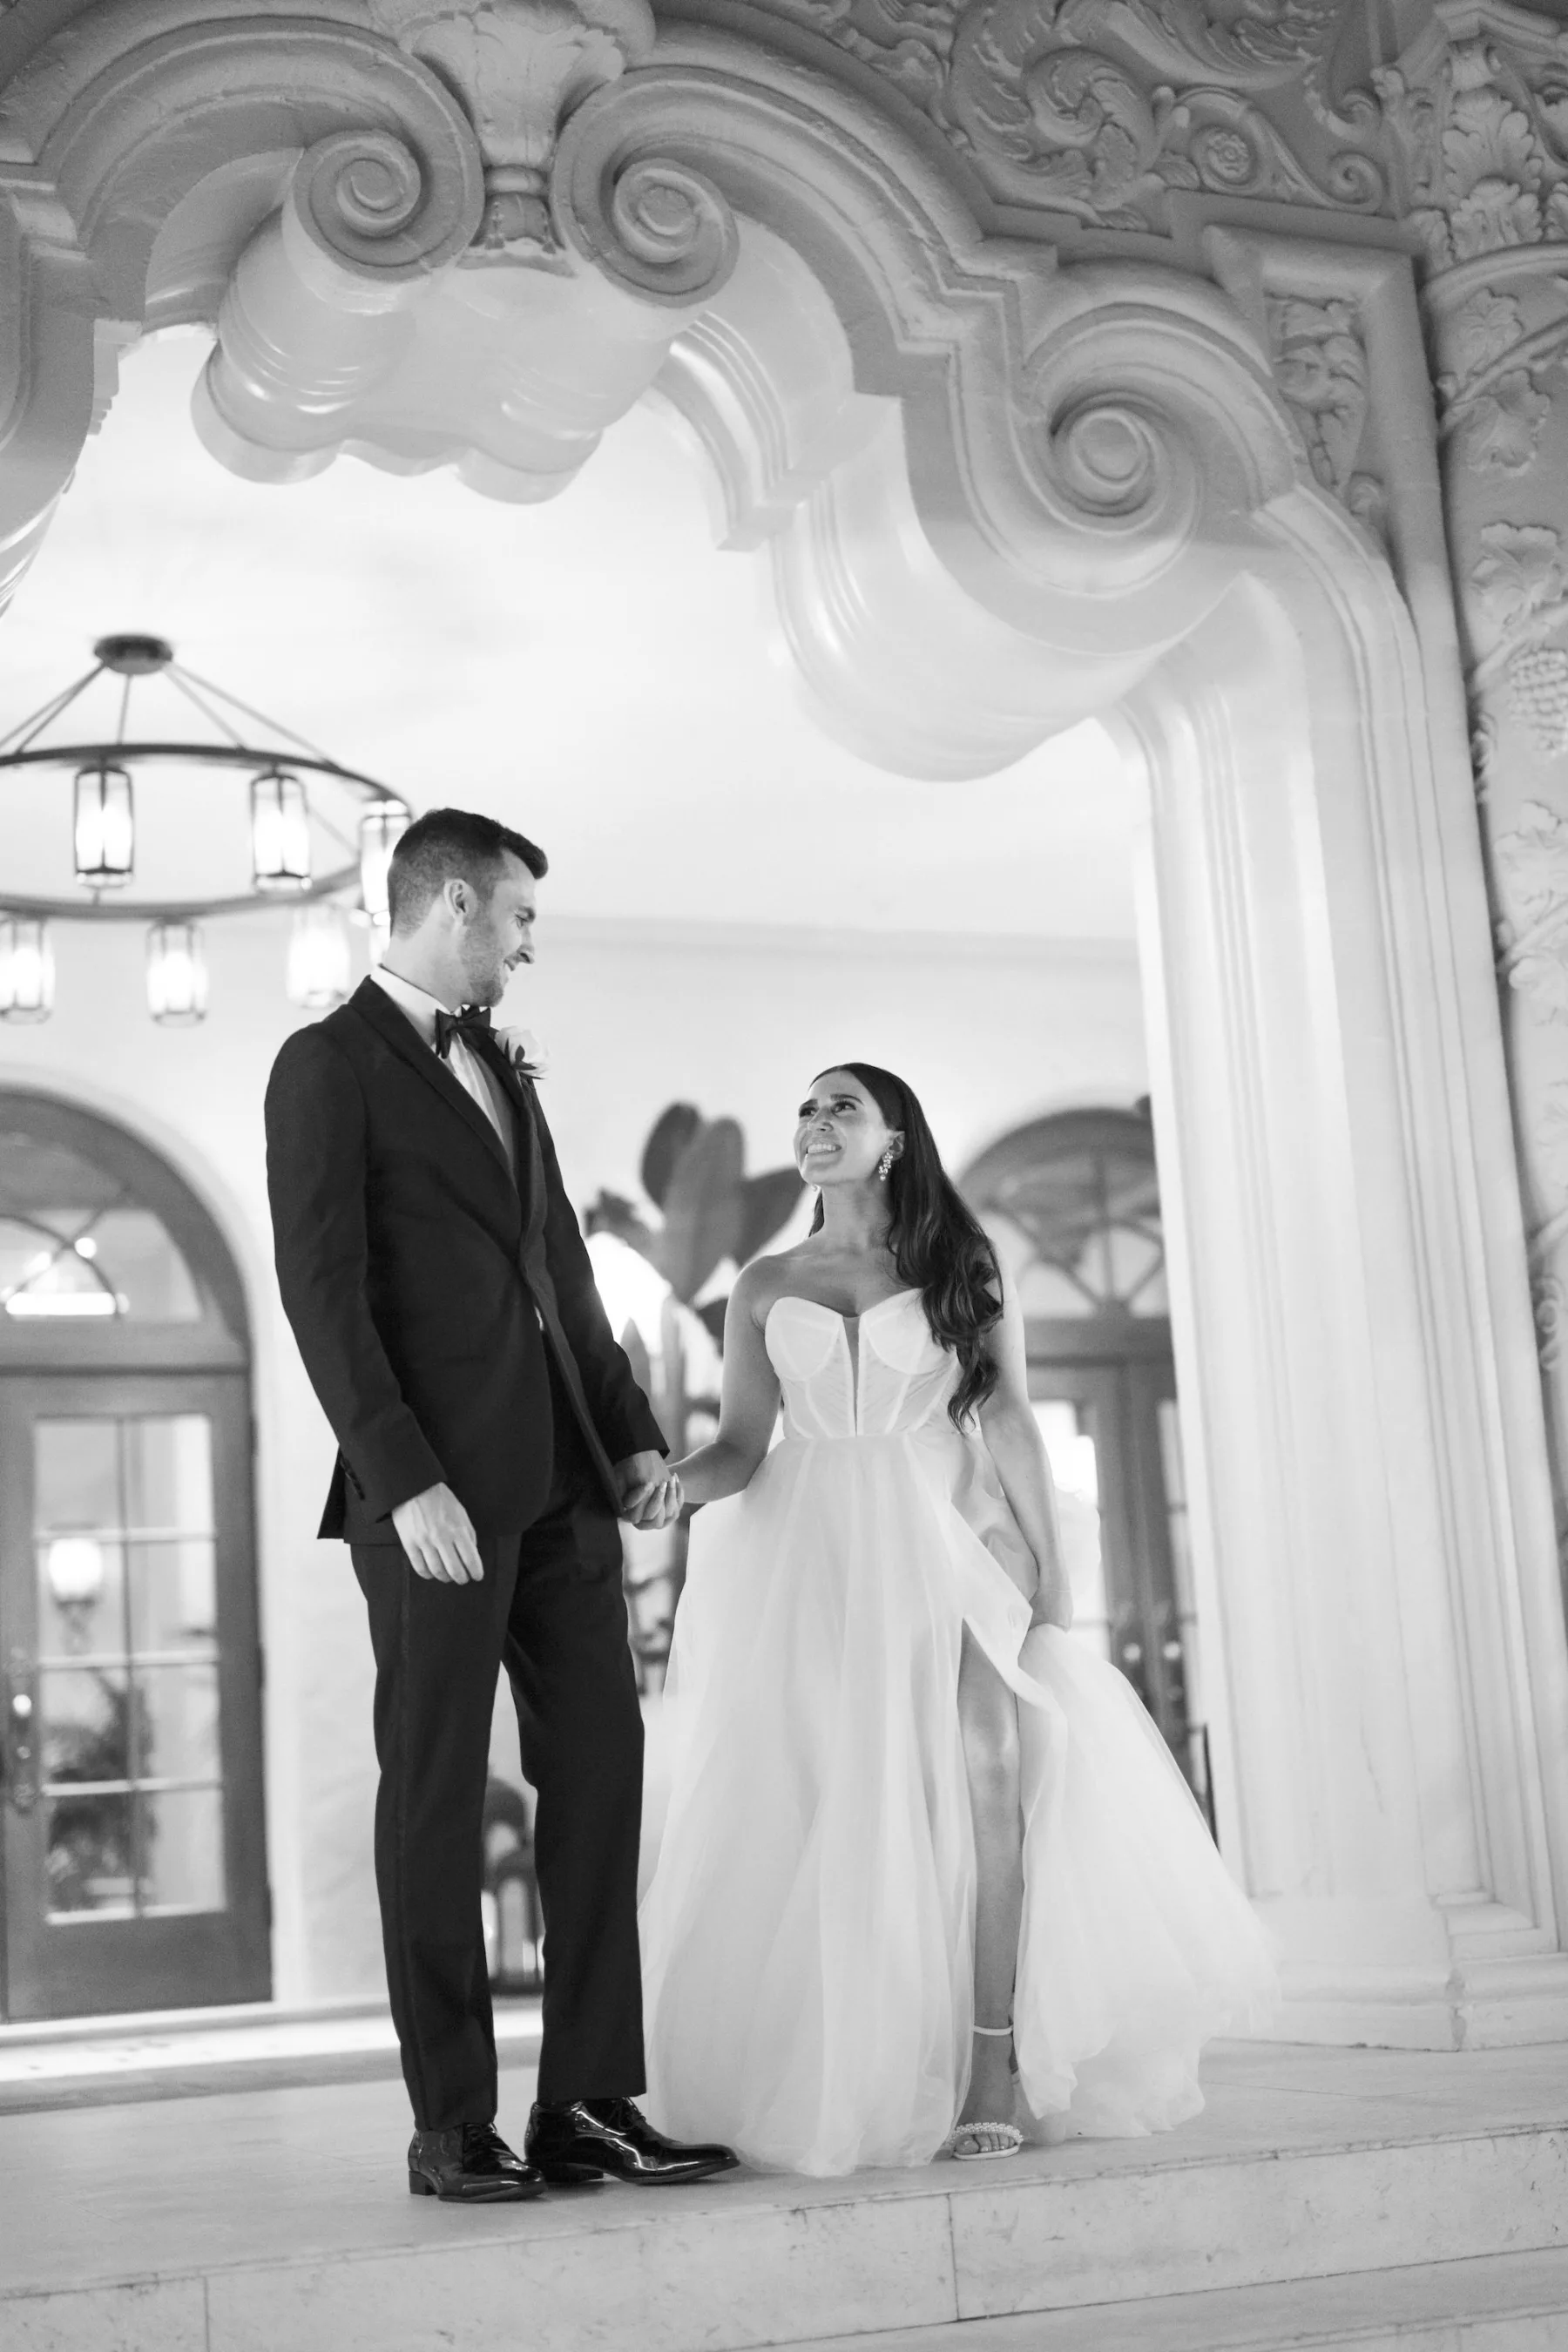 Romantic Bride and Groom Black and White Wedding Portrait | Tampa Bay Photographer Dewitt For Love